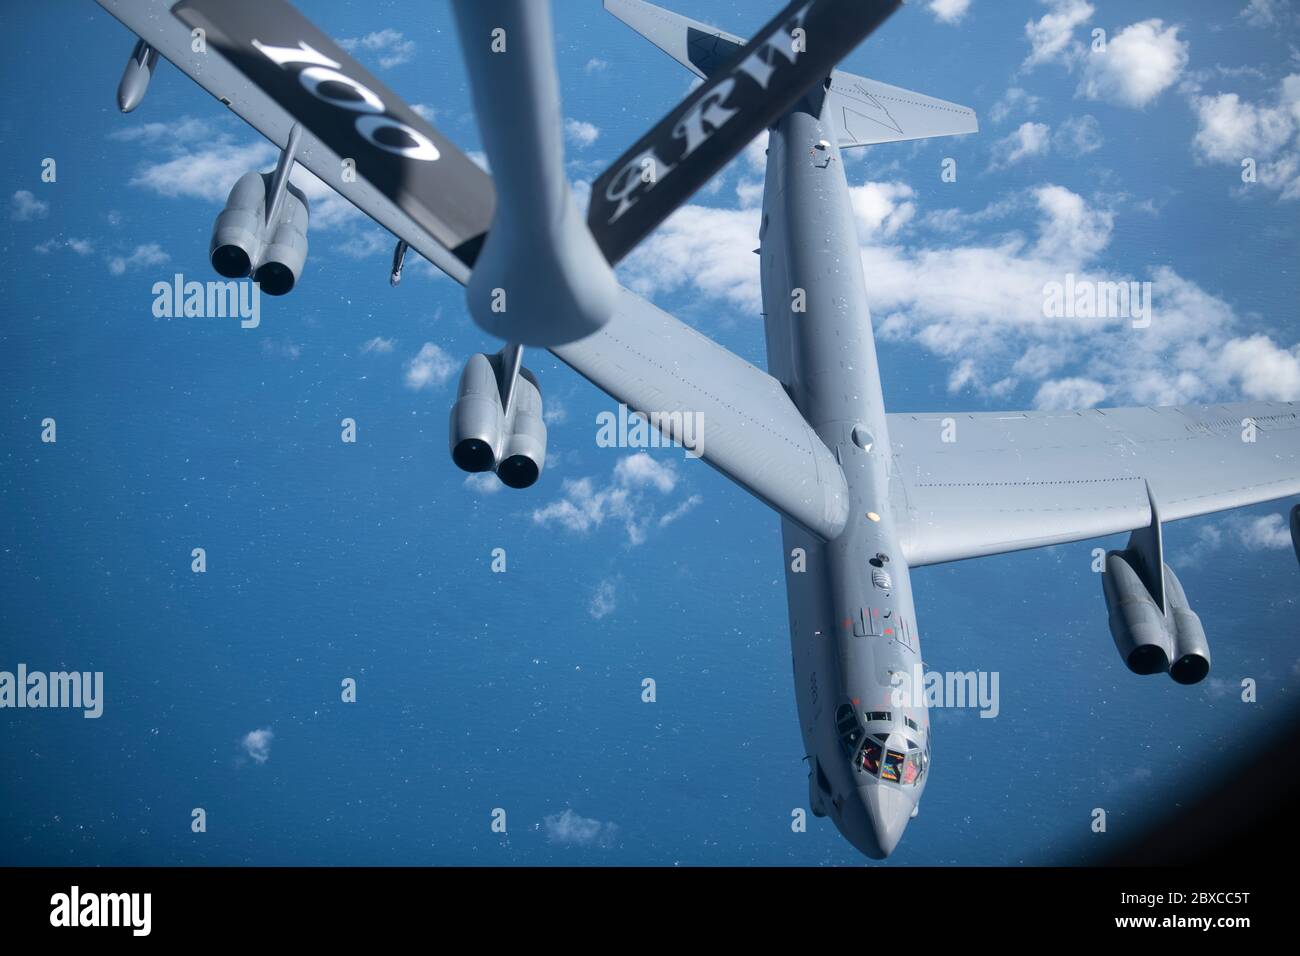 A U.S. Air Force B-52 Stratofortress bomber aircraft from the 5th Bomb Wing, breaks away from a KC-135 Stratotanker aircraft after refueling during a strategic bomber mission June 3, 2020 off the northern Norwegian coast. Stock Photo